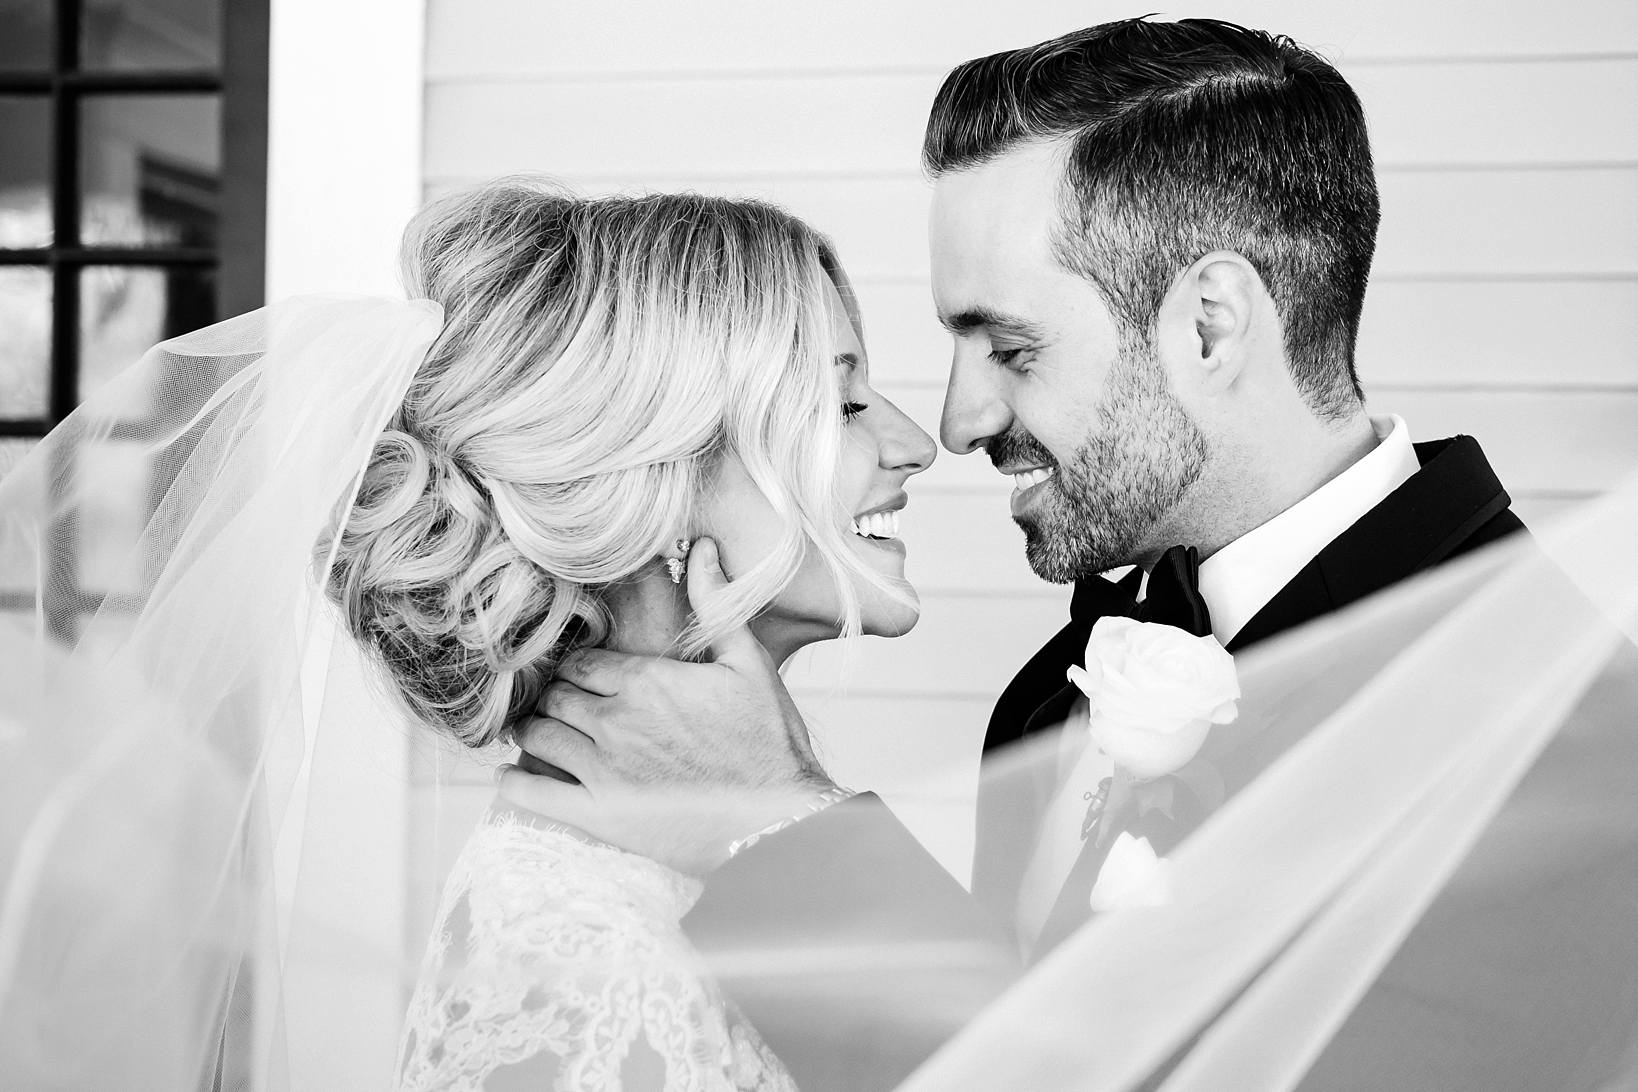 Wedding photo of the bride and groom in timeless black and white by Sarah & Ben Photography